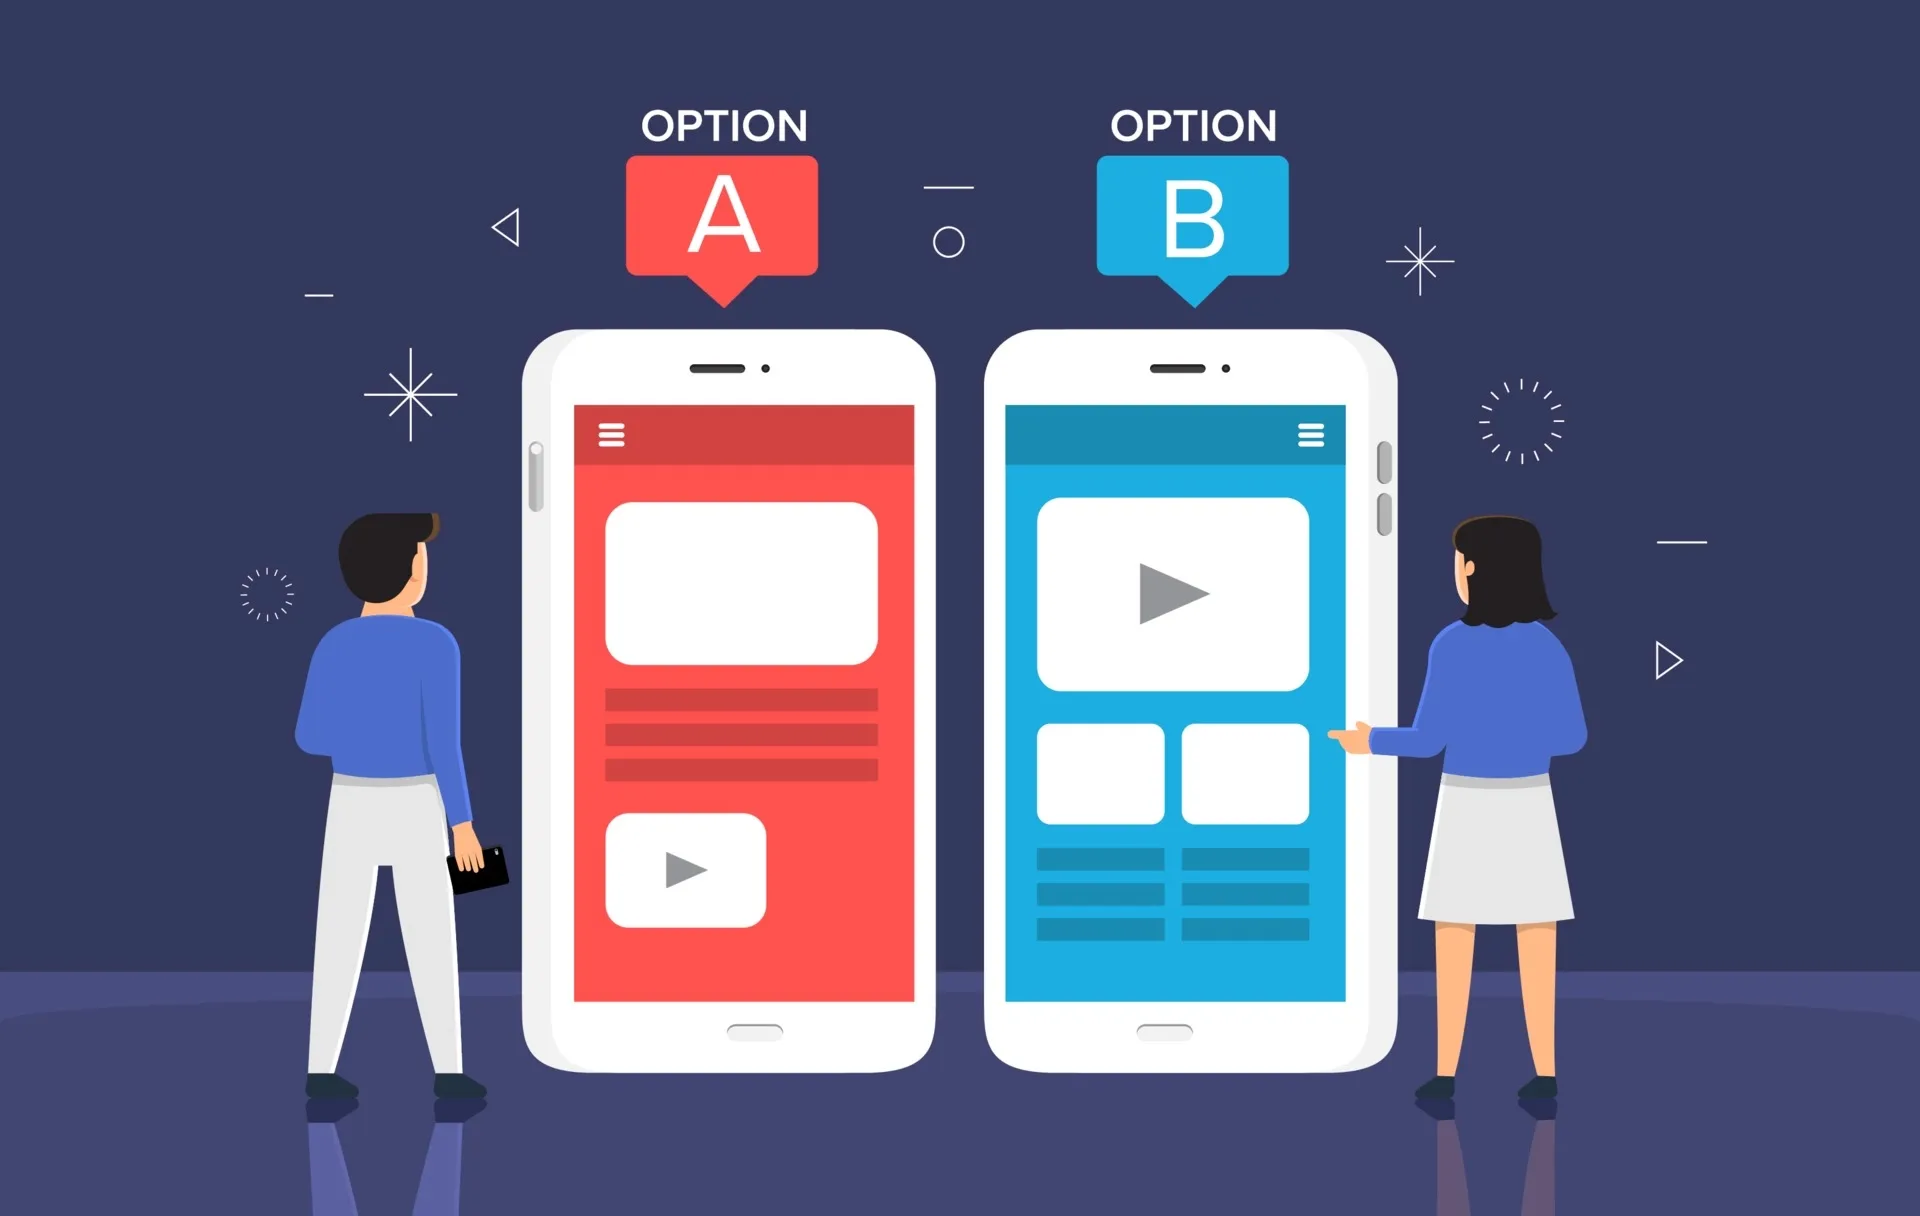 An illustration of man looking at mobile phone with option A and a woman looking at mobile phone with option B